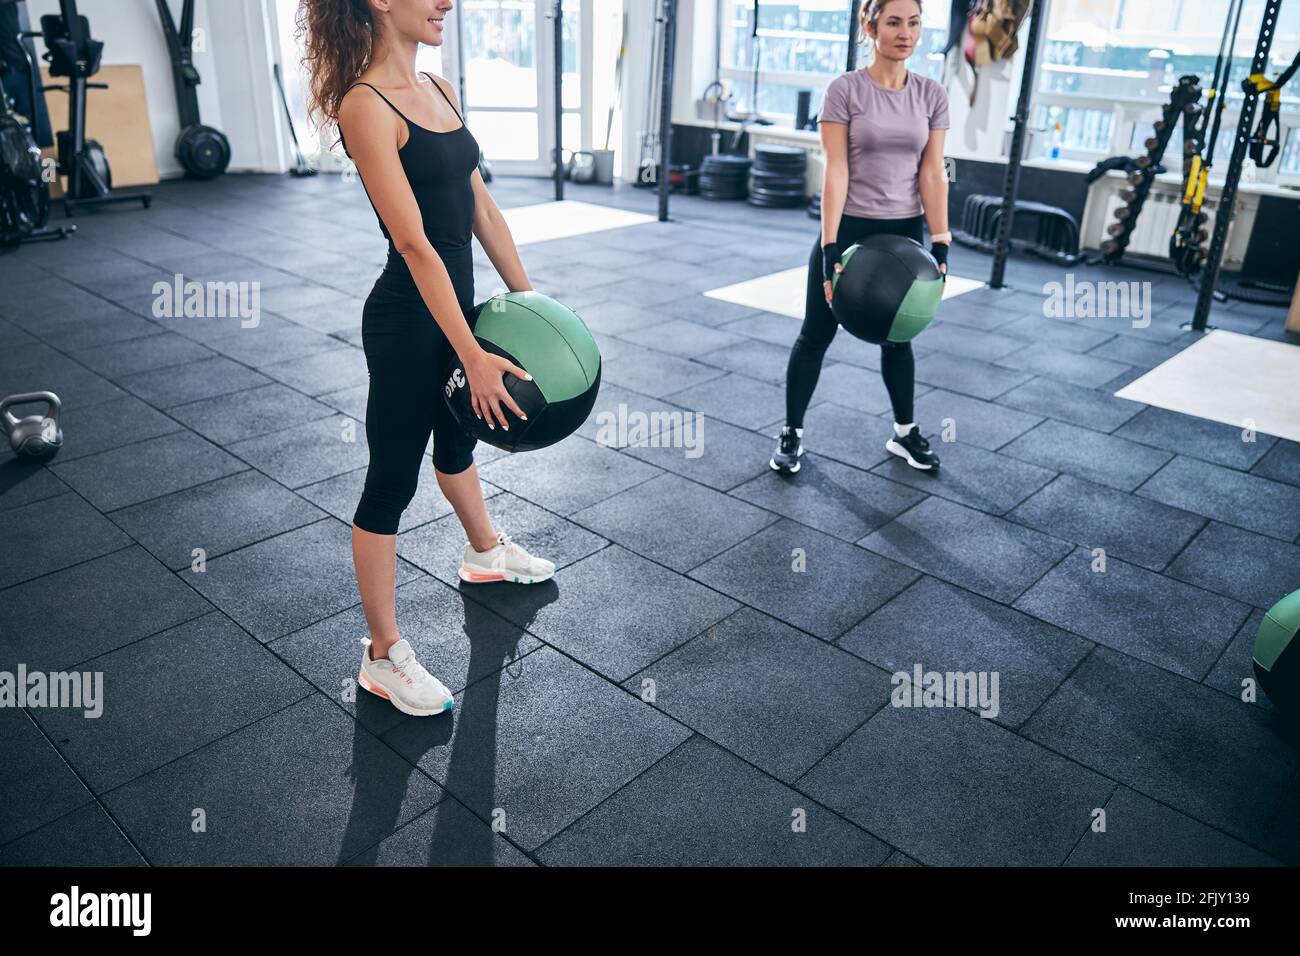 Two young female athletes performing an exercise Stock Photo